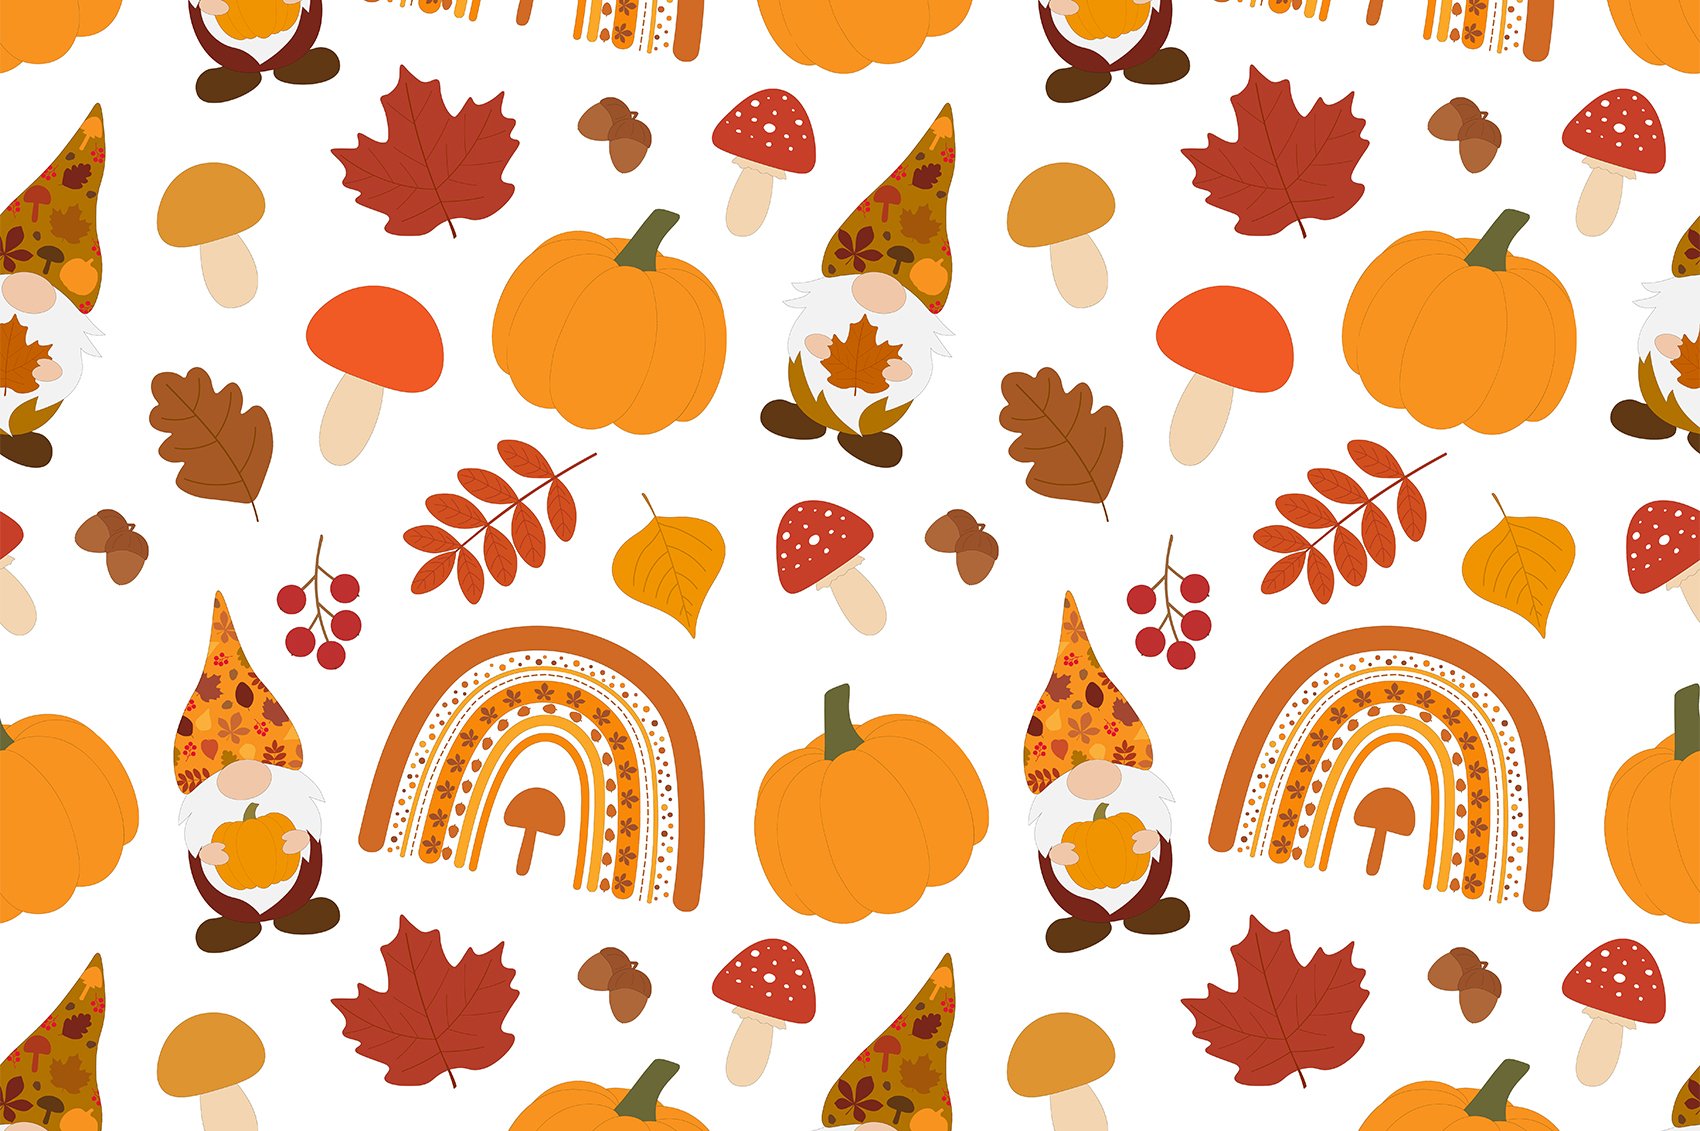 Perfect colors mix and necessary elements for a full autumn illustration.